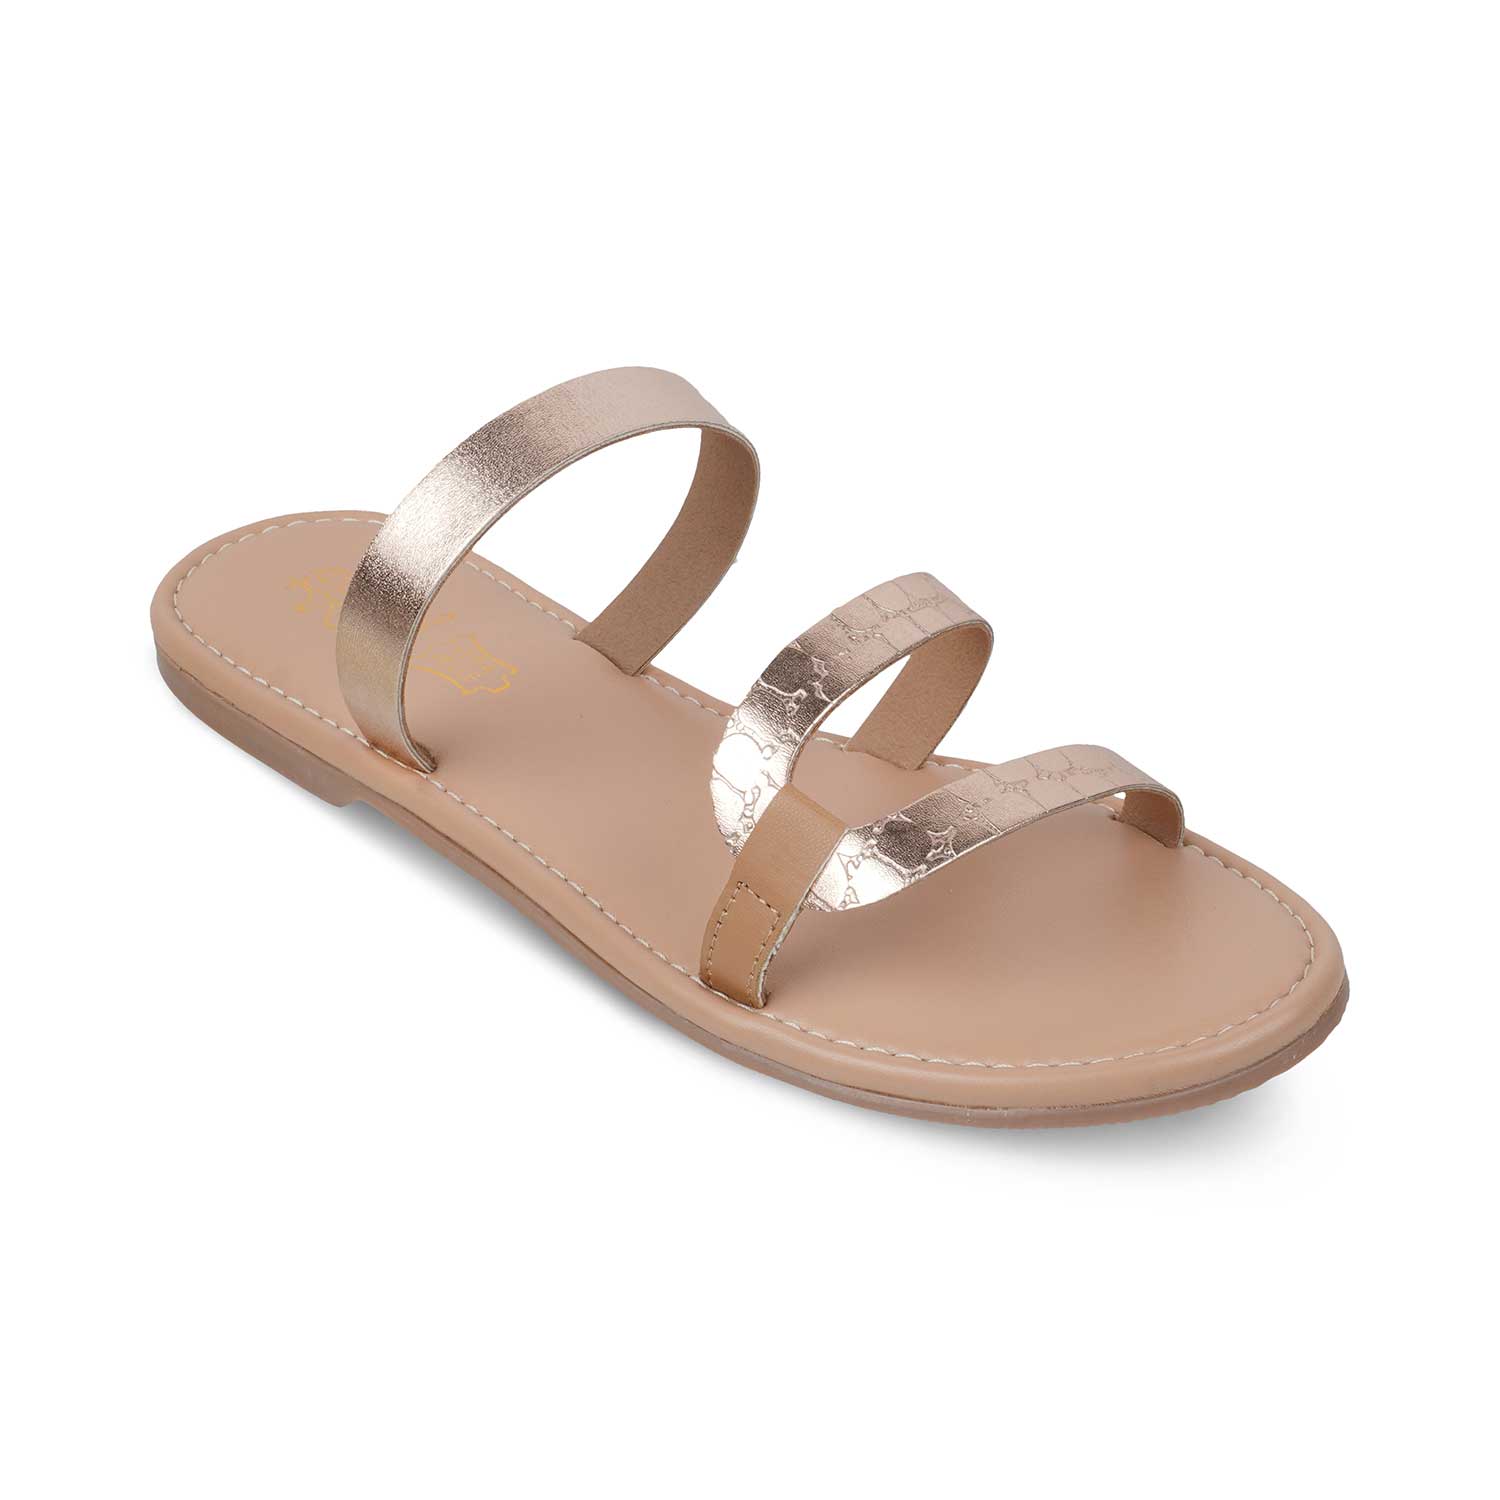 The Sna Champagne Women's Casual Flats Tresmode